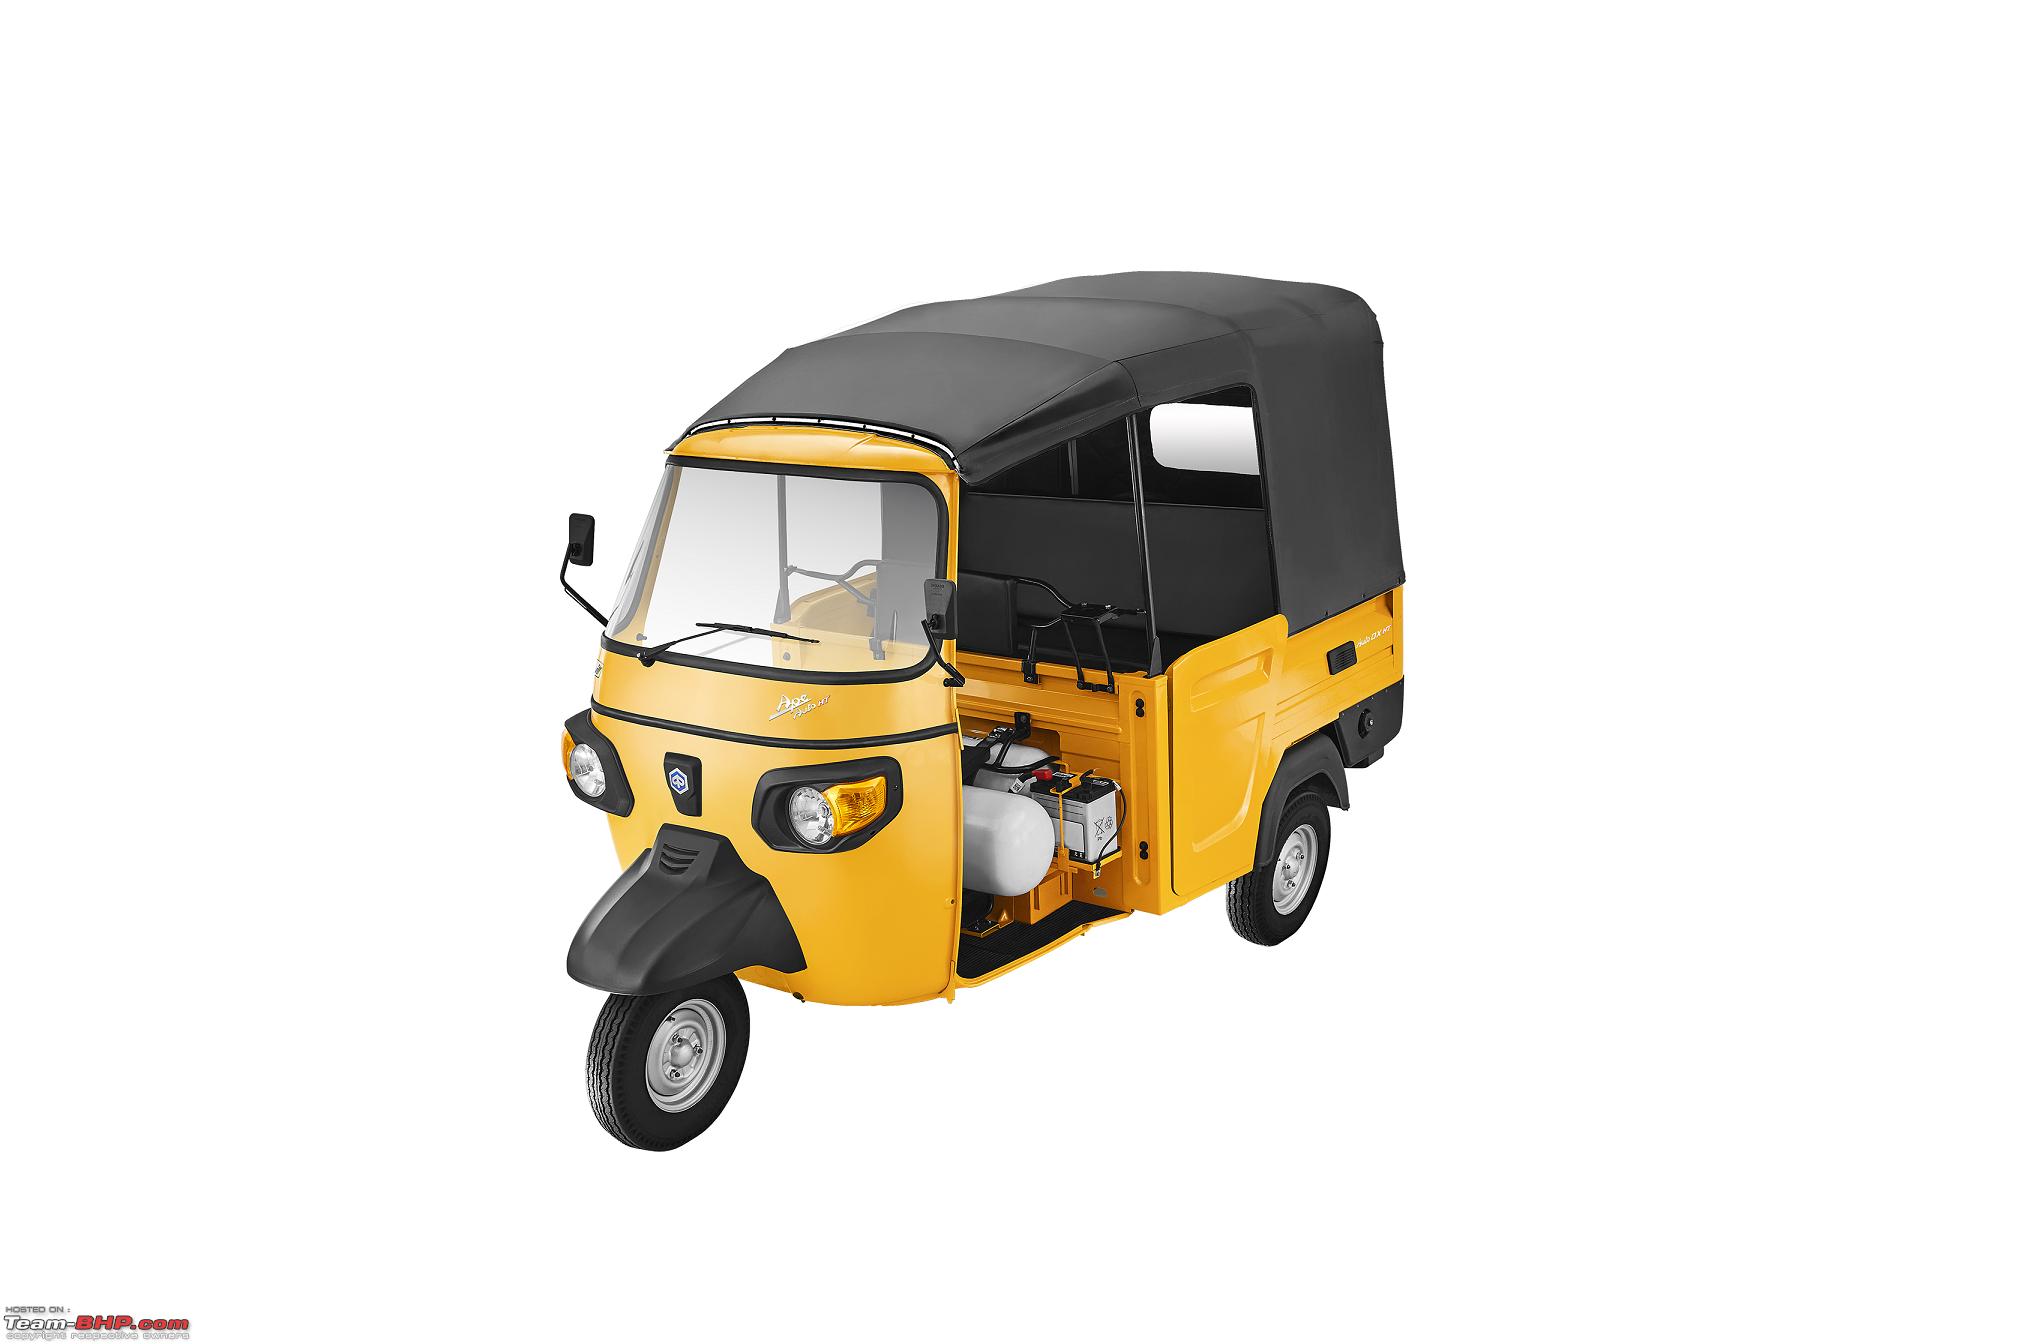 Piaggio launches Ape HT 300cc BS6 Petrol and CNG 3-wheelers - Team-BHP